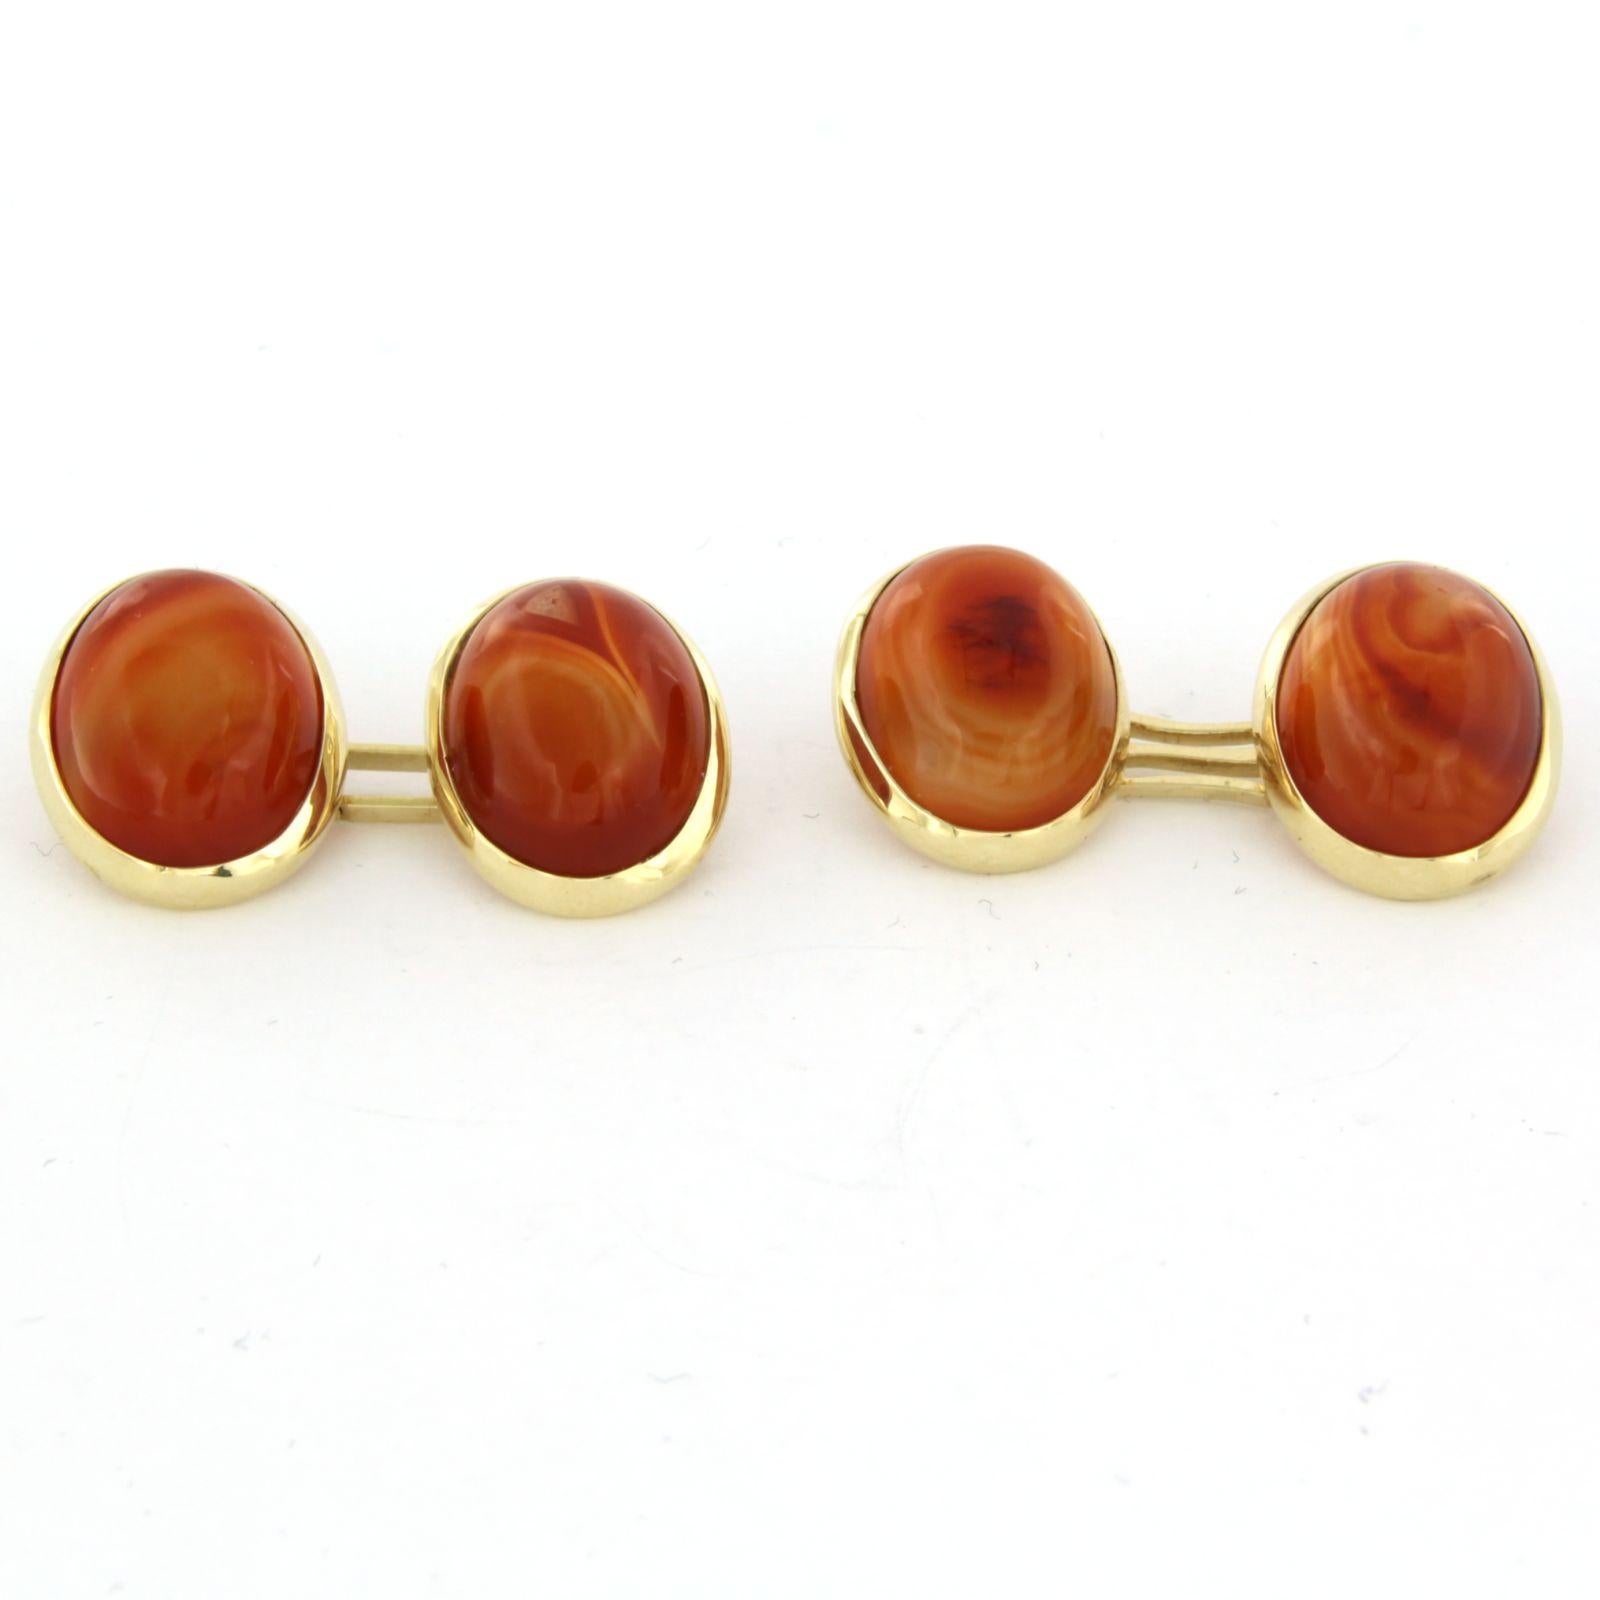 14 kt yellow gold cufflinks set with agate - size 1.7 cm x 1.4 cm

detailed description

The cufflinks are 1.7 cm wide and 1.4 cm high

weight 11.6 grams

Set with

- 2 x 1.5 cm x 1.1 cm oval cabochon cut agate

color red and yellow
clarity